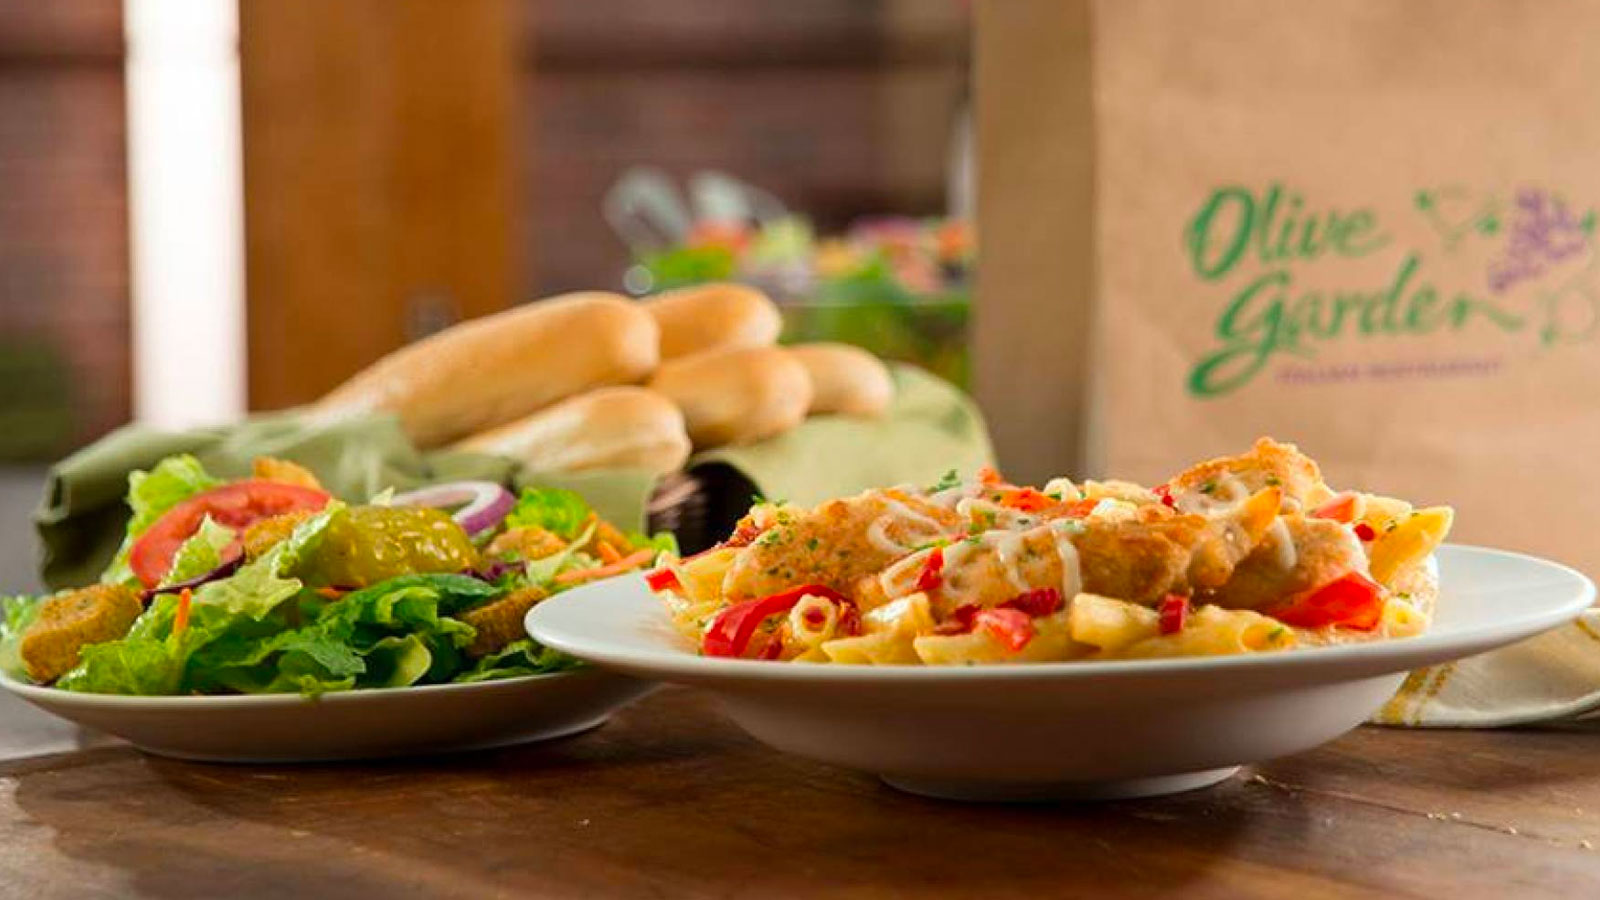 You got: Olive Garden! Which Restaurant Chain Are You?